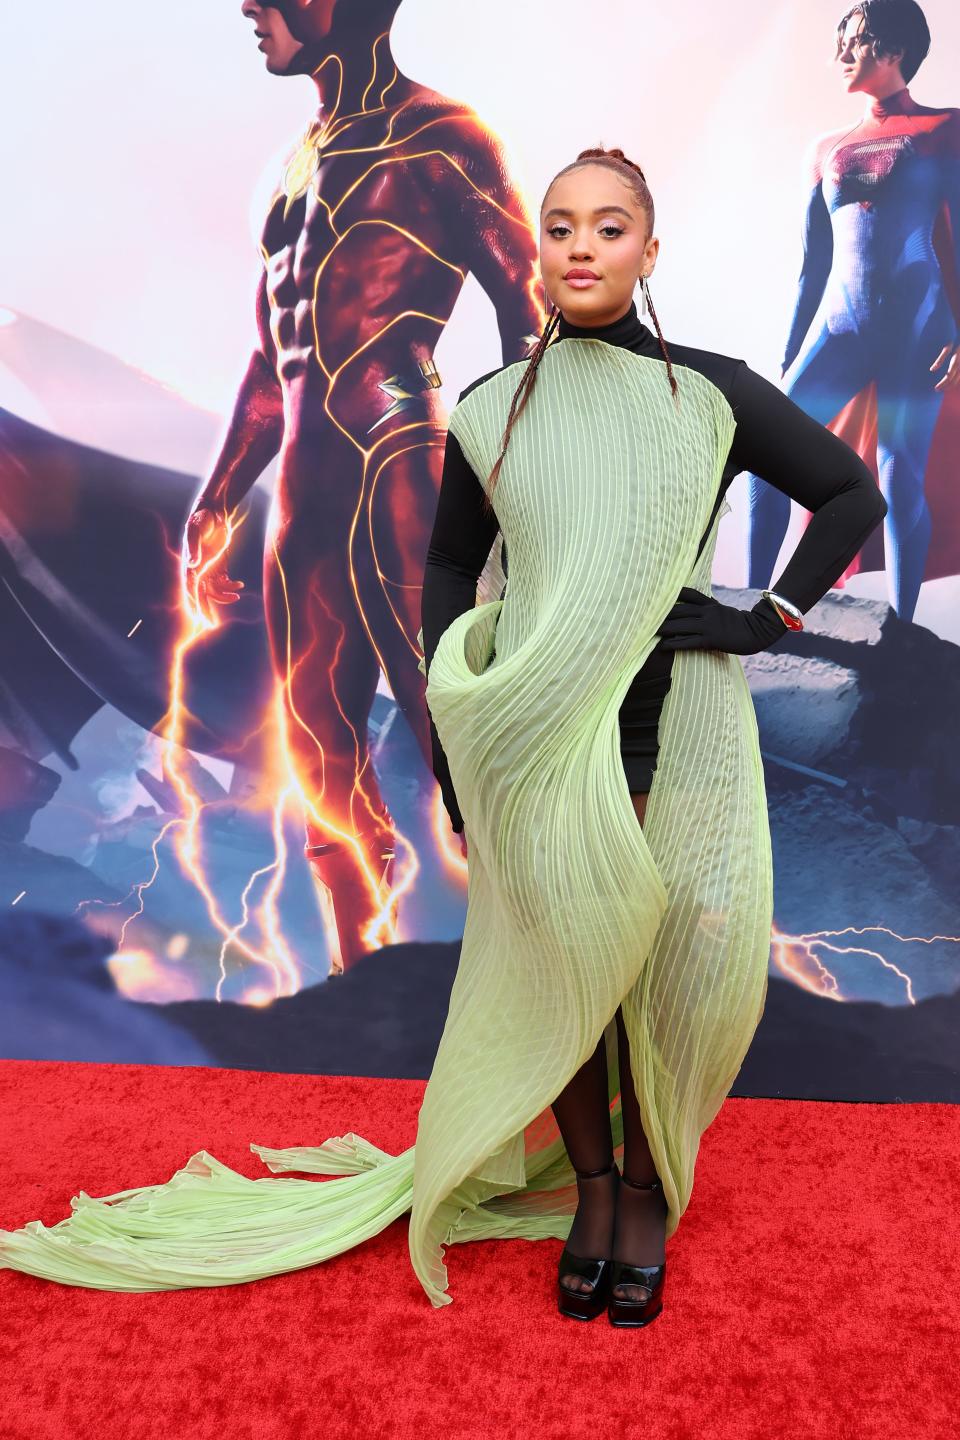 Kiersey Clemons attends the Los Angeles premiere of "The Flash" on June 12, 2023.